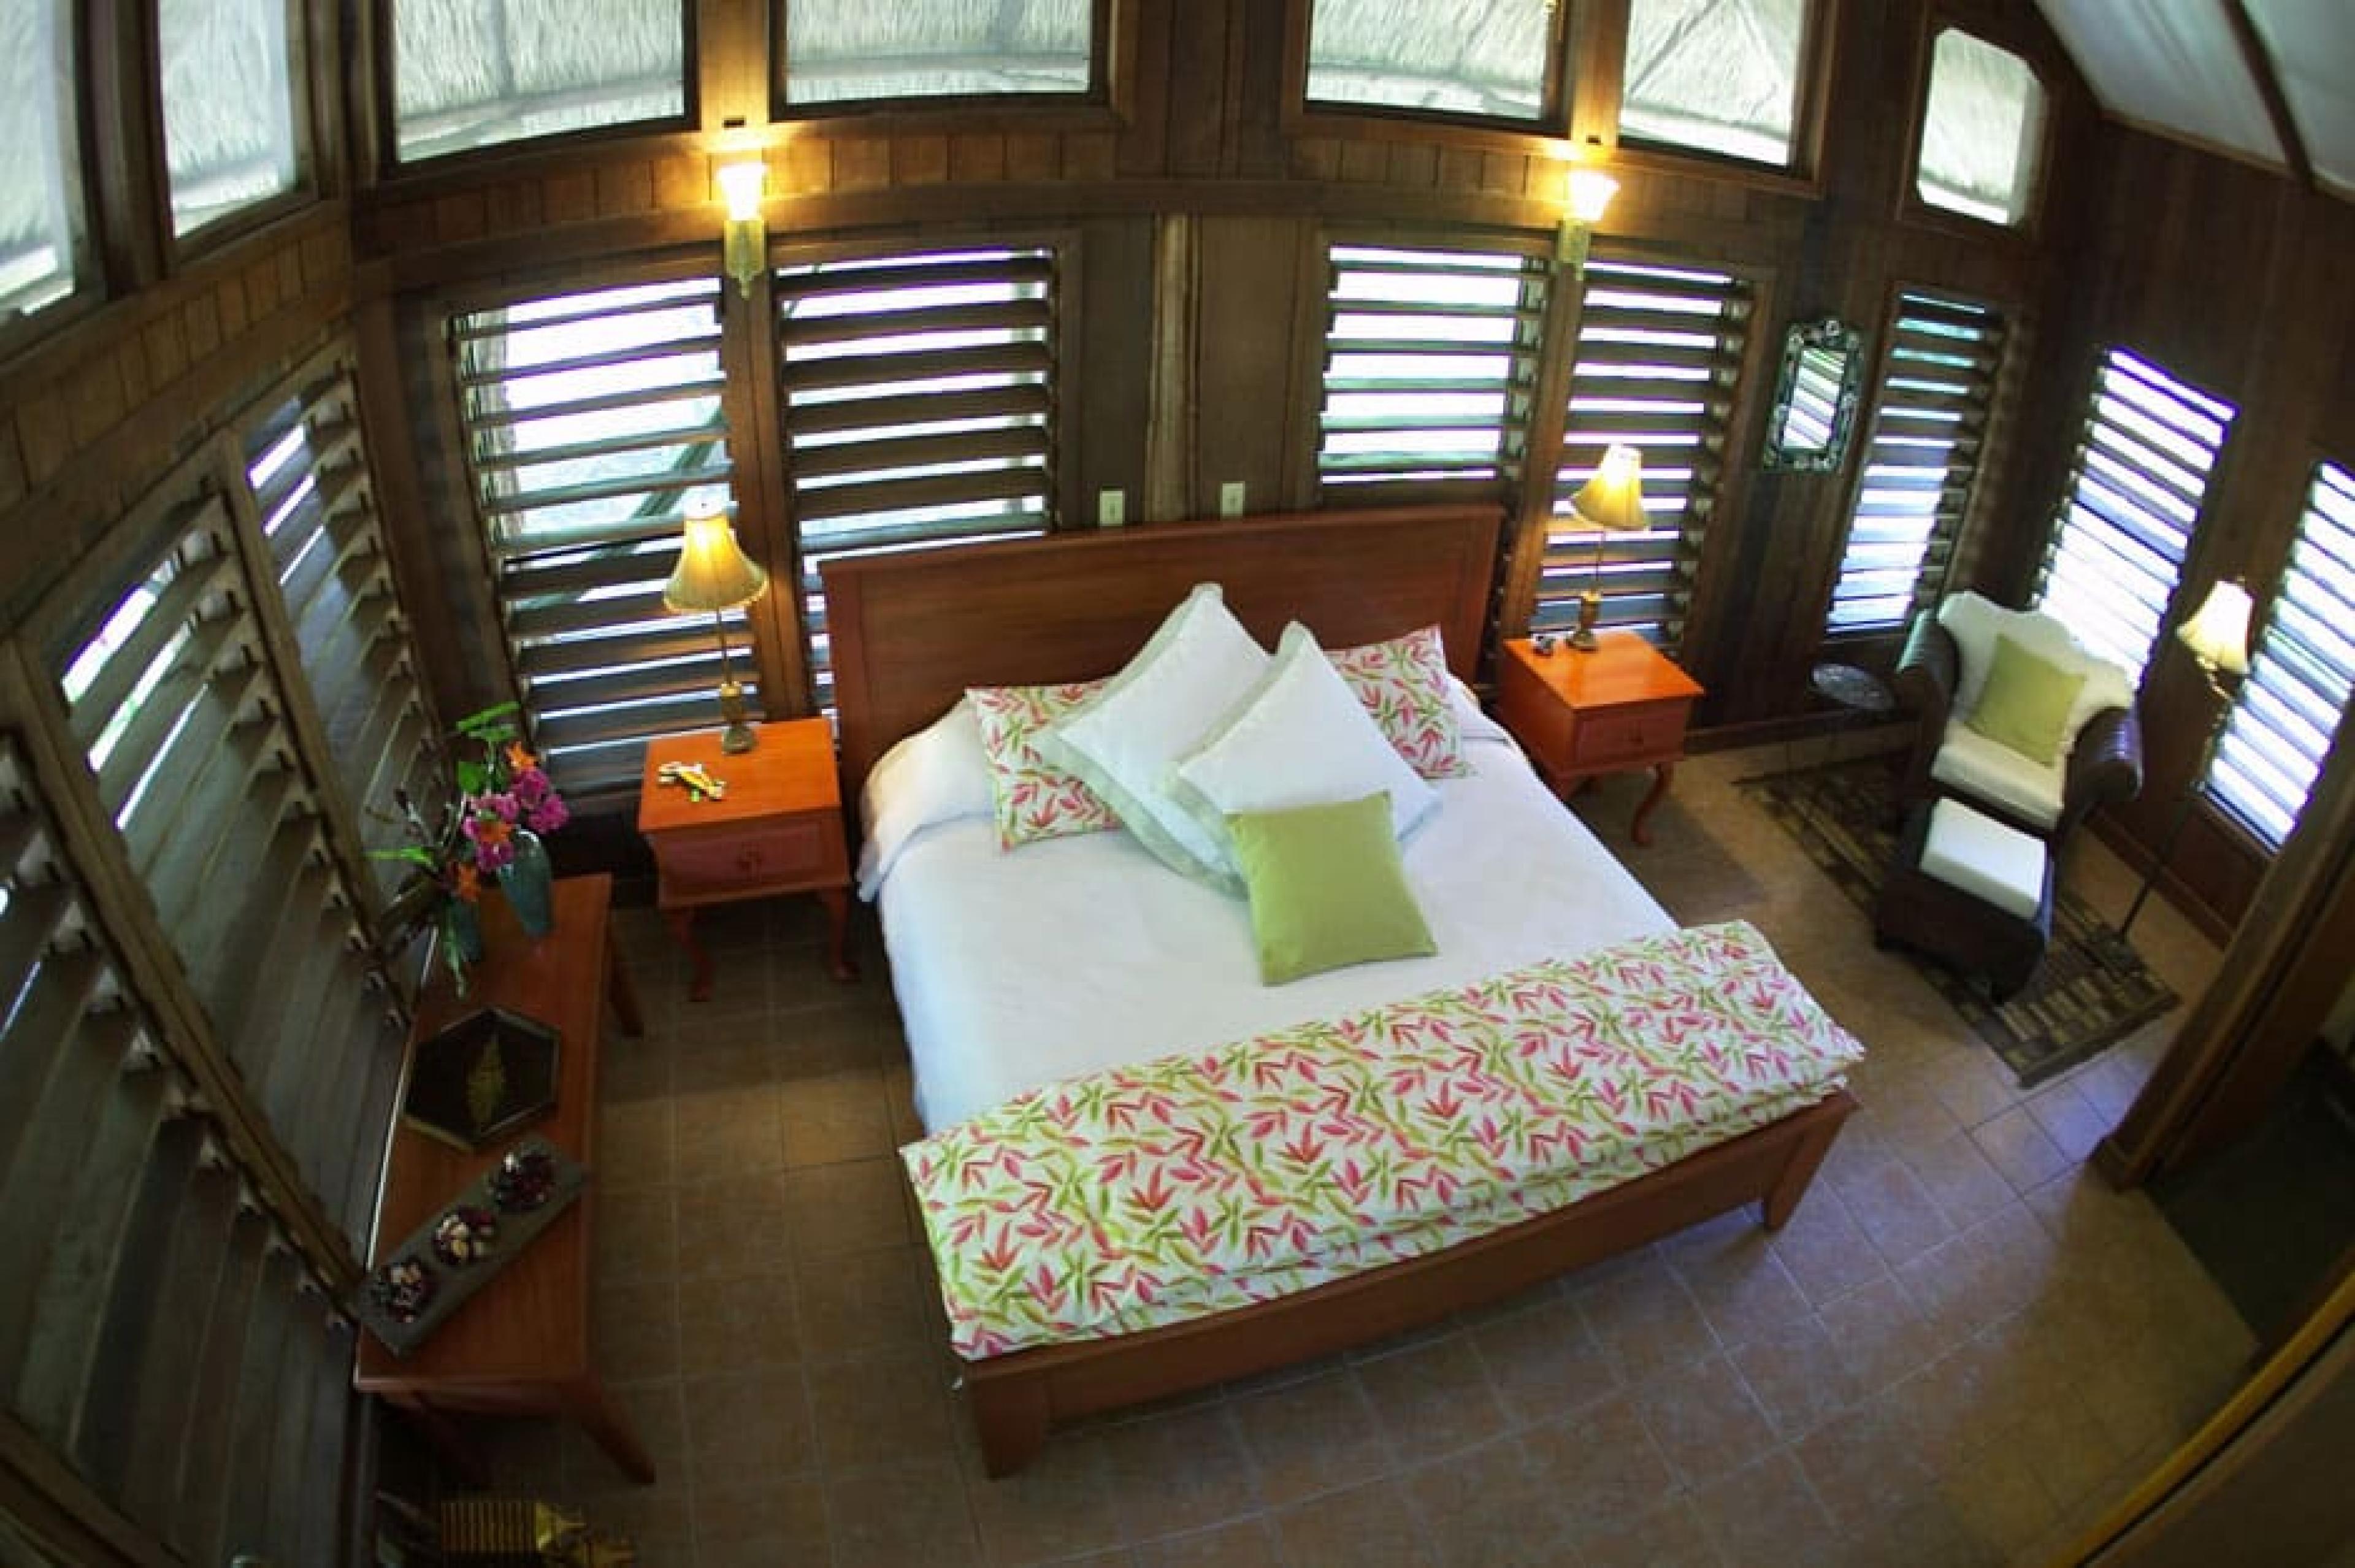 Bedroom at Chan Chich Lodge, Belize